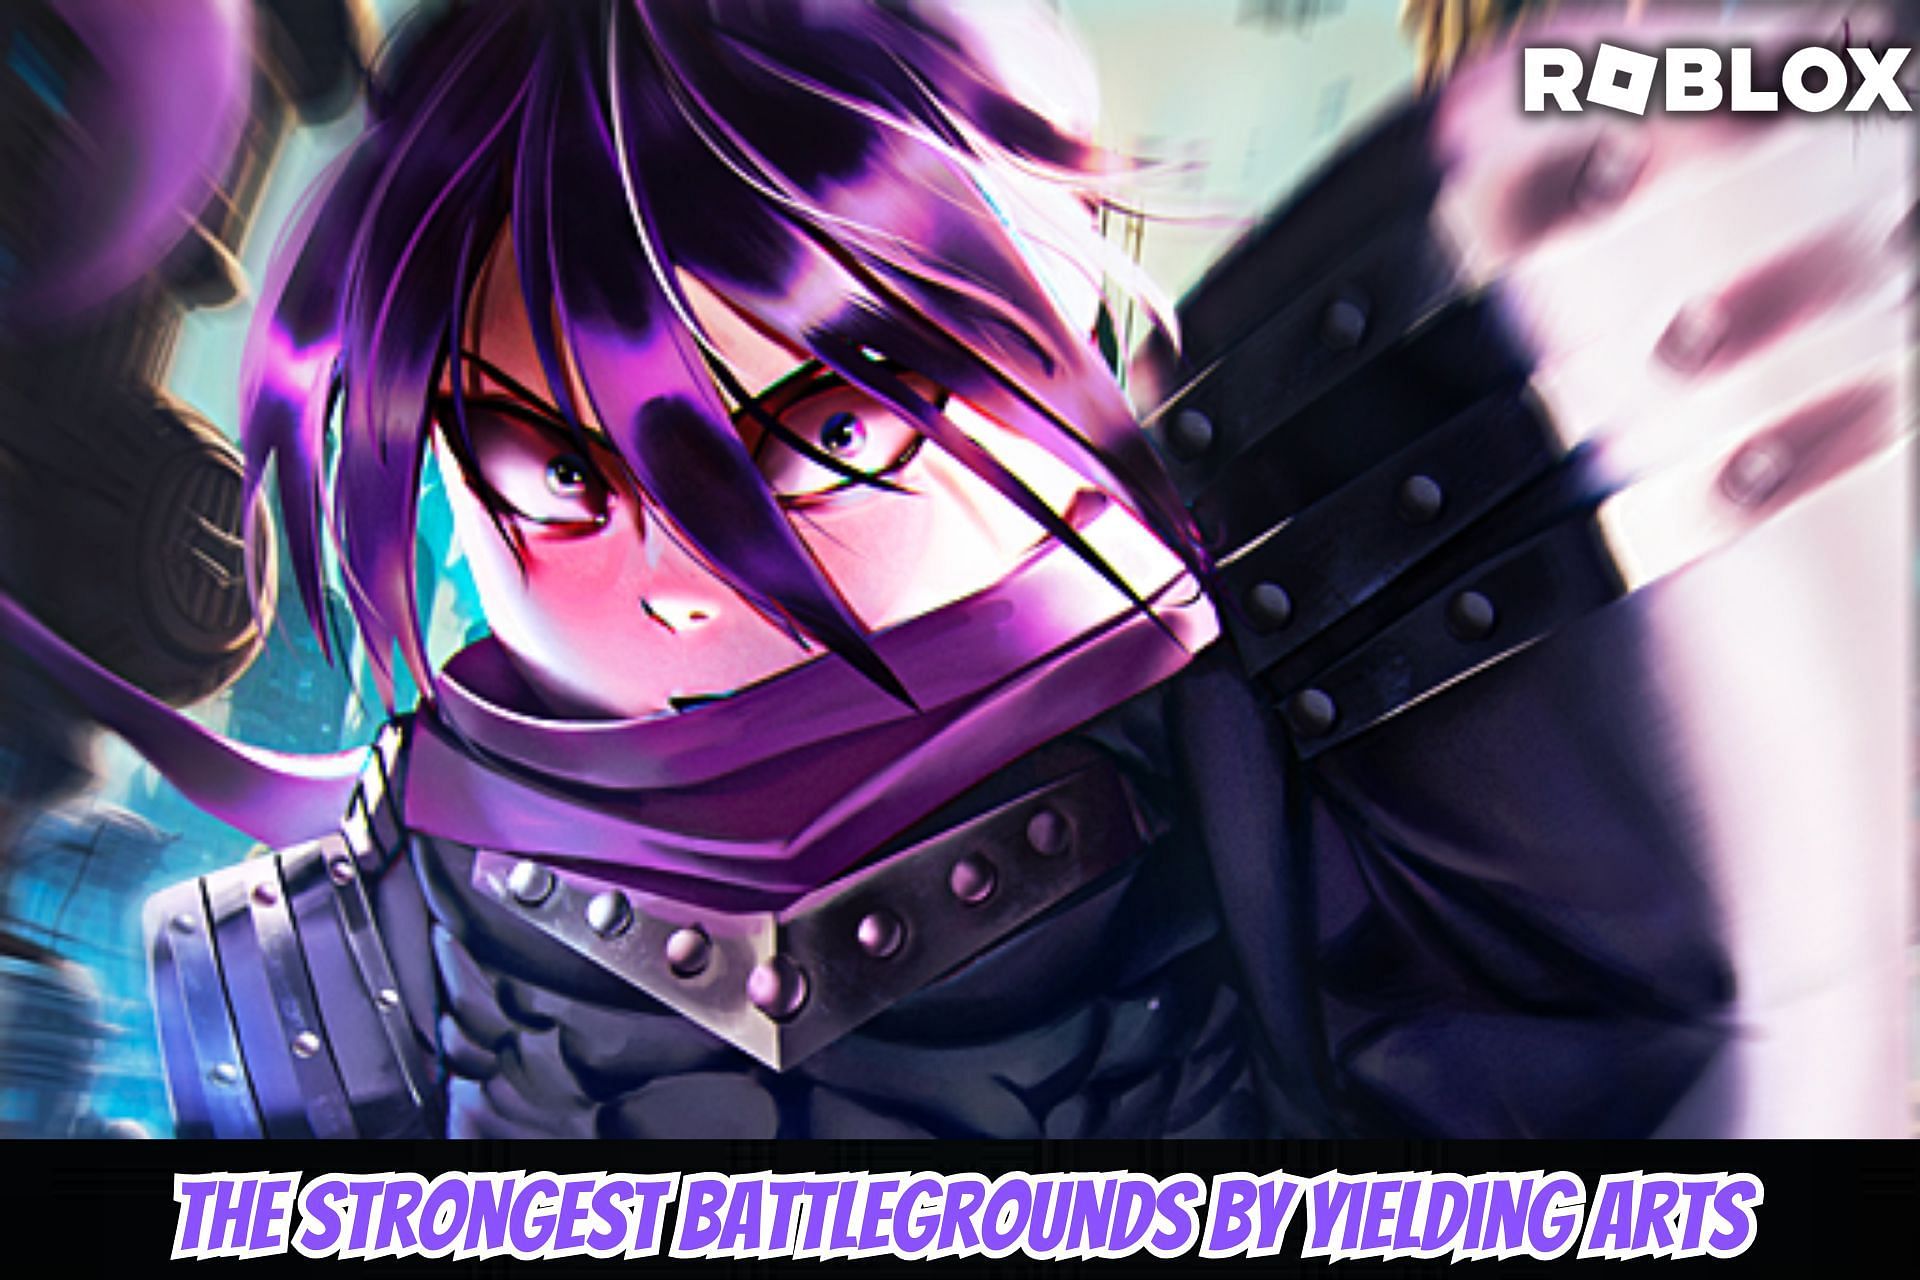 The Strongest Battlegrounds: New Cyborg Update Review 